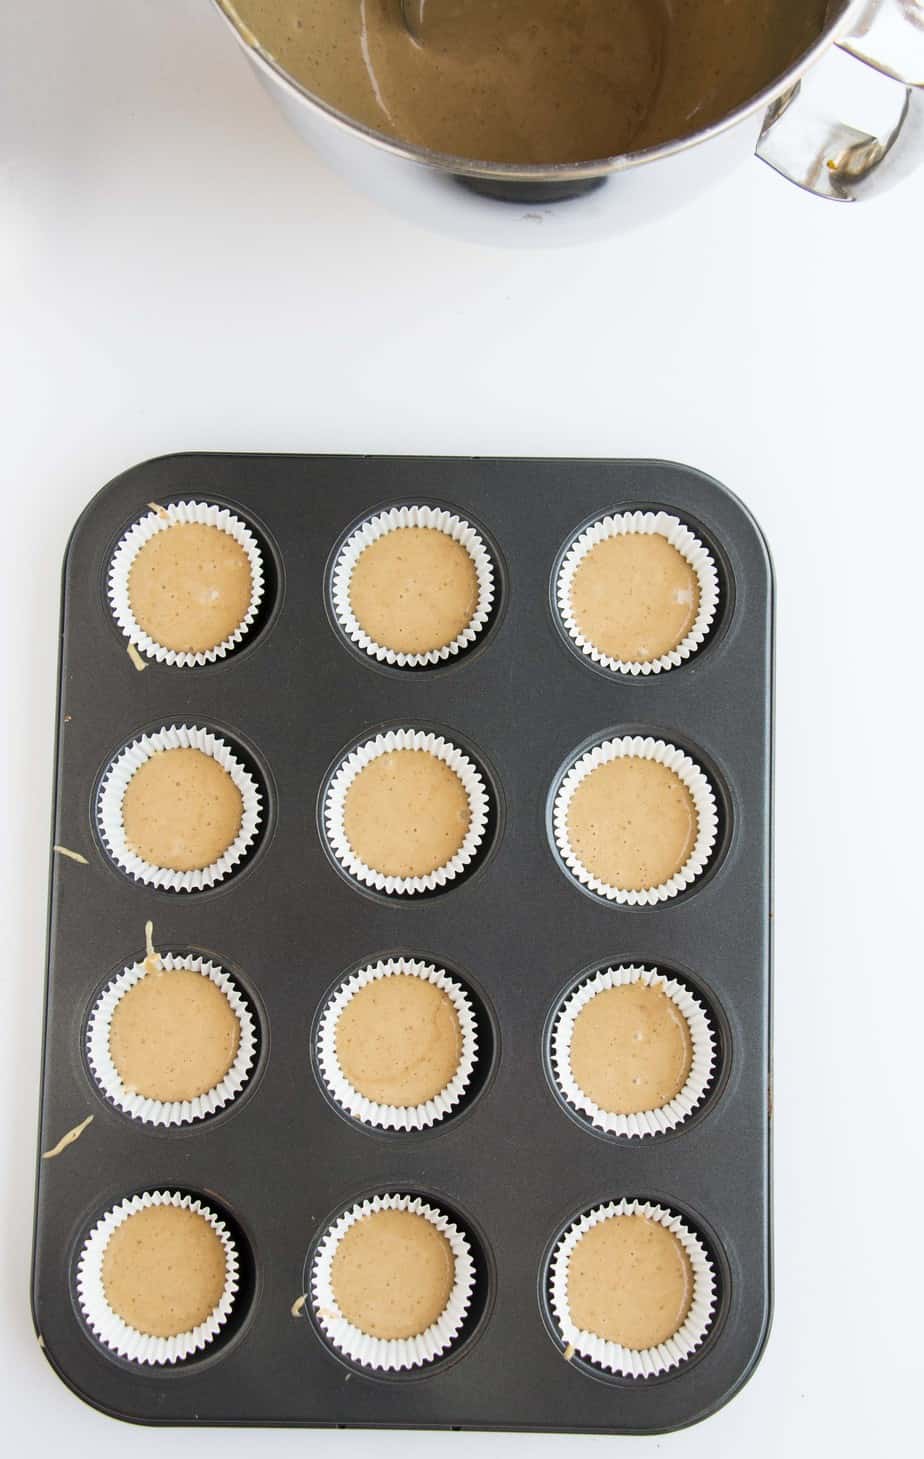 cupcake batter in a baking tray.